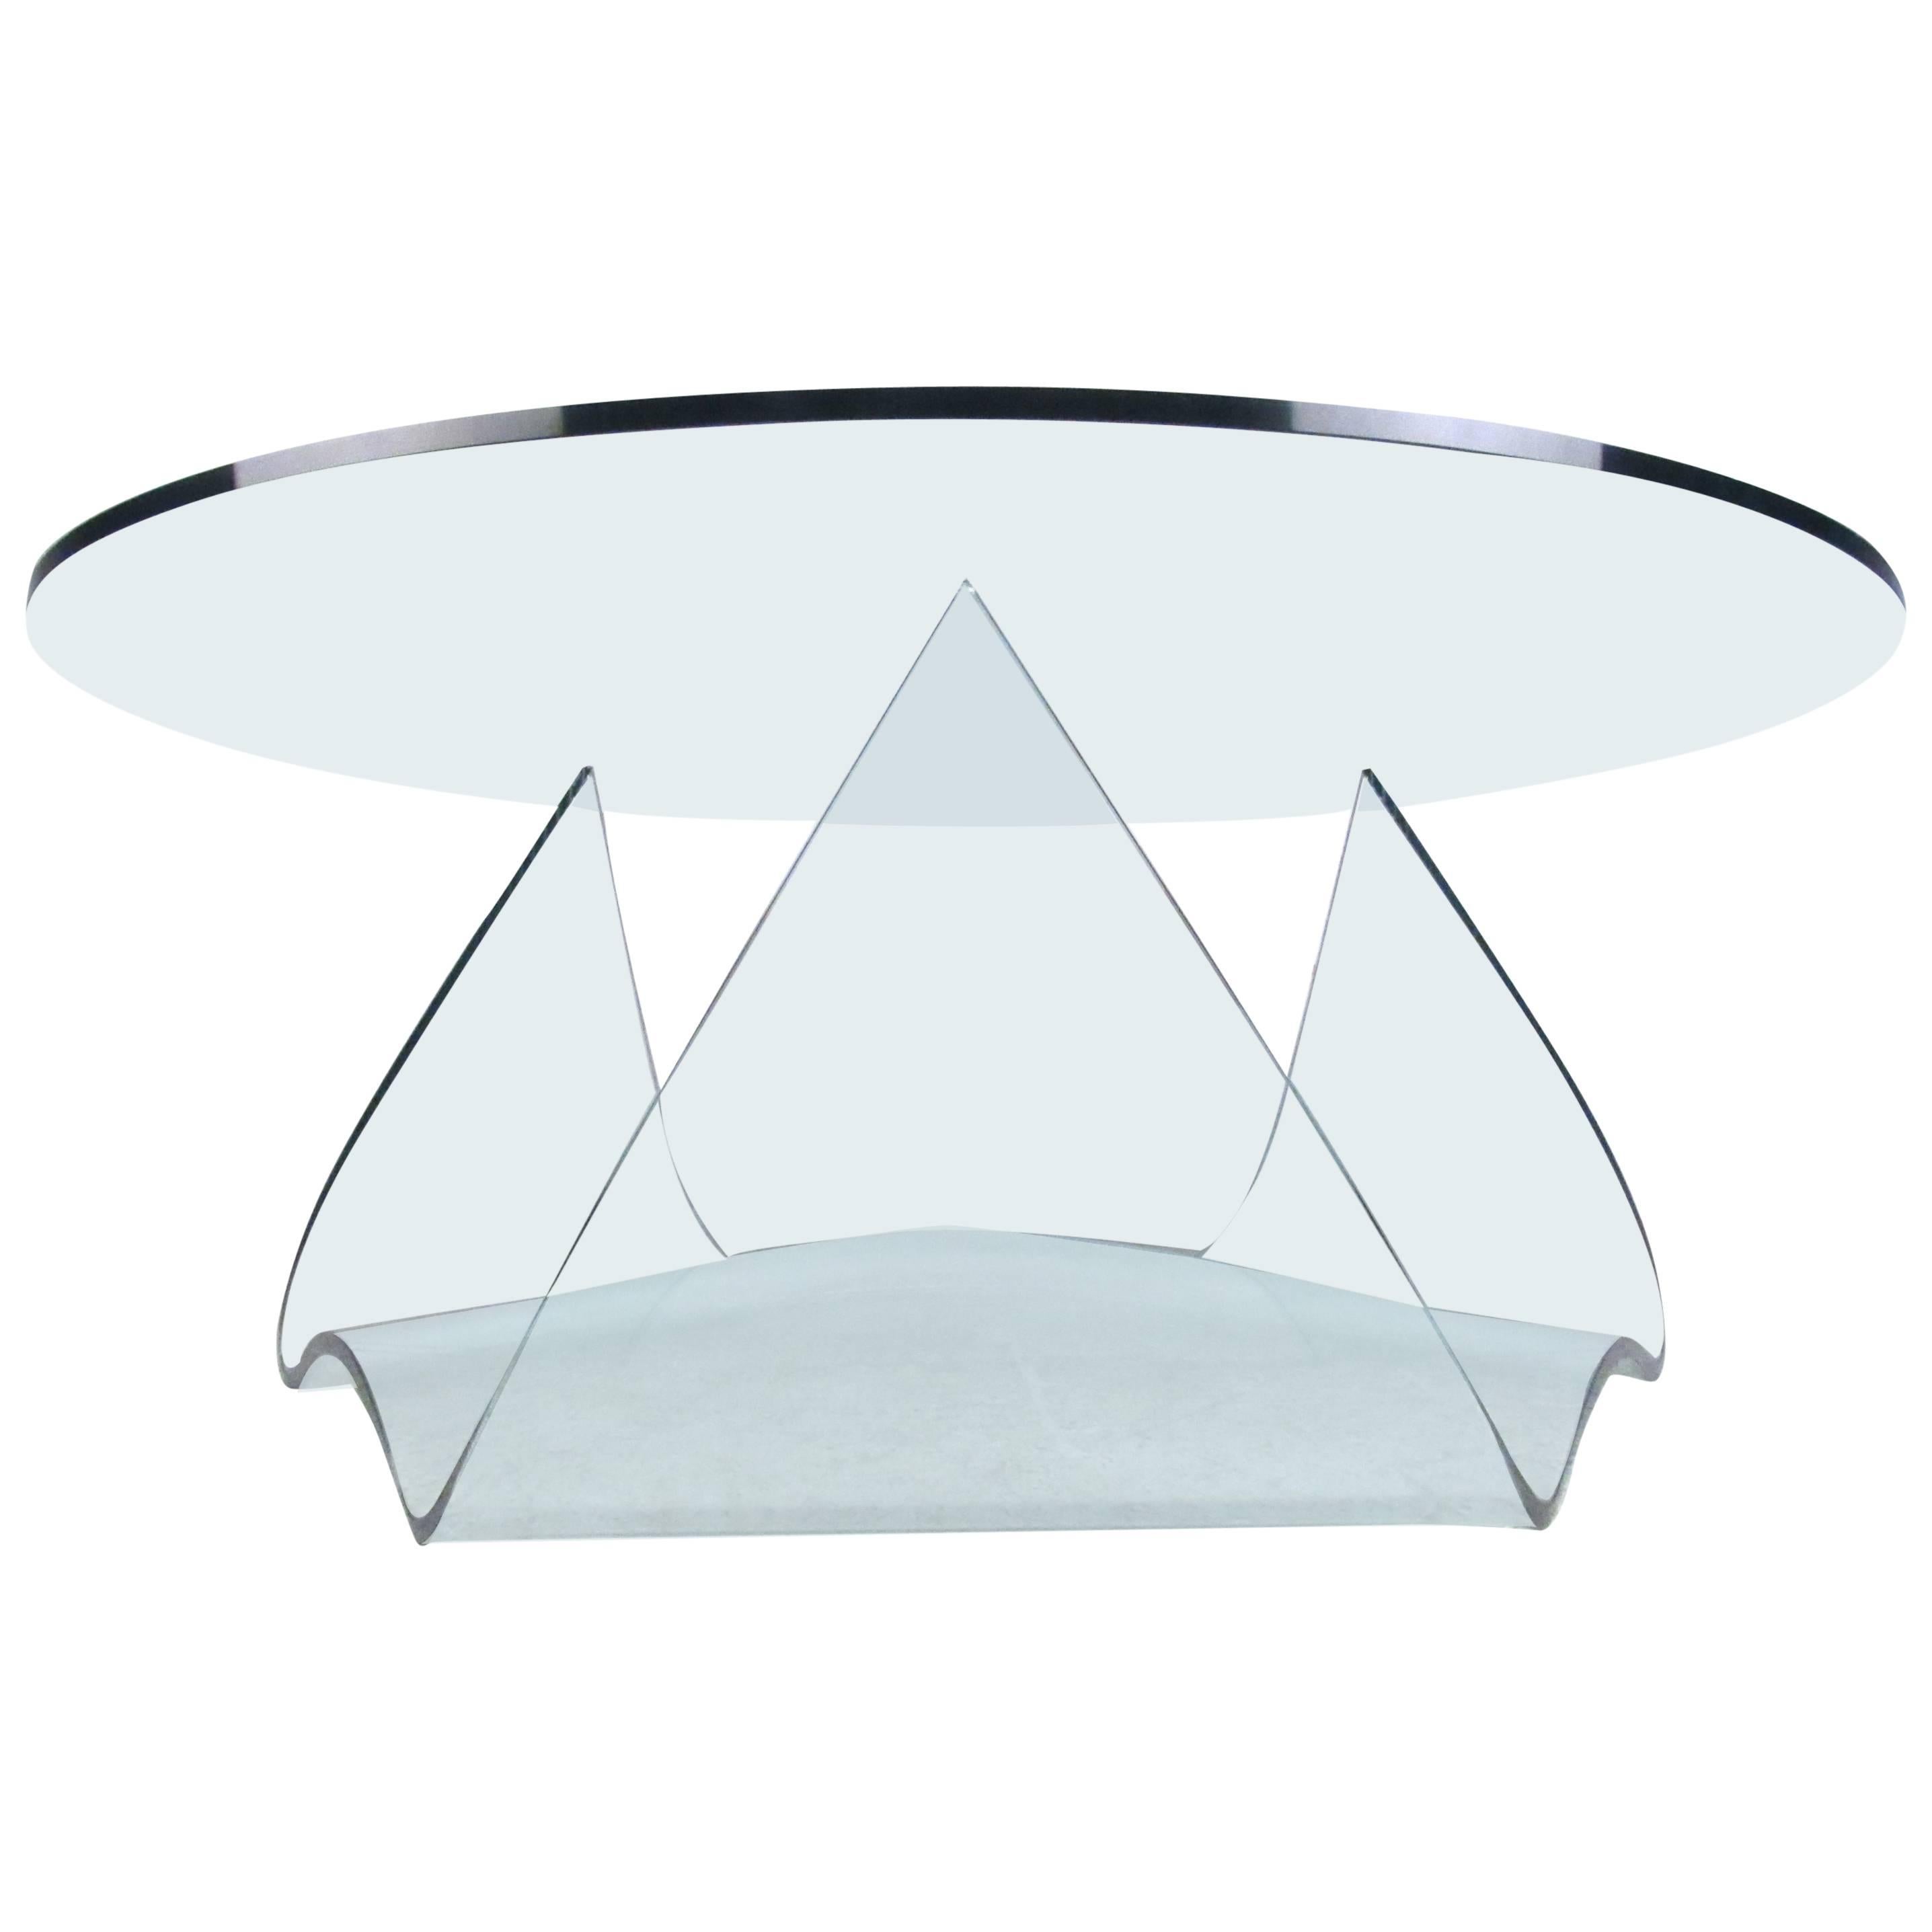 Unique Mid-Century Molded Glass Coffee Table by Pace For Sale